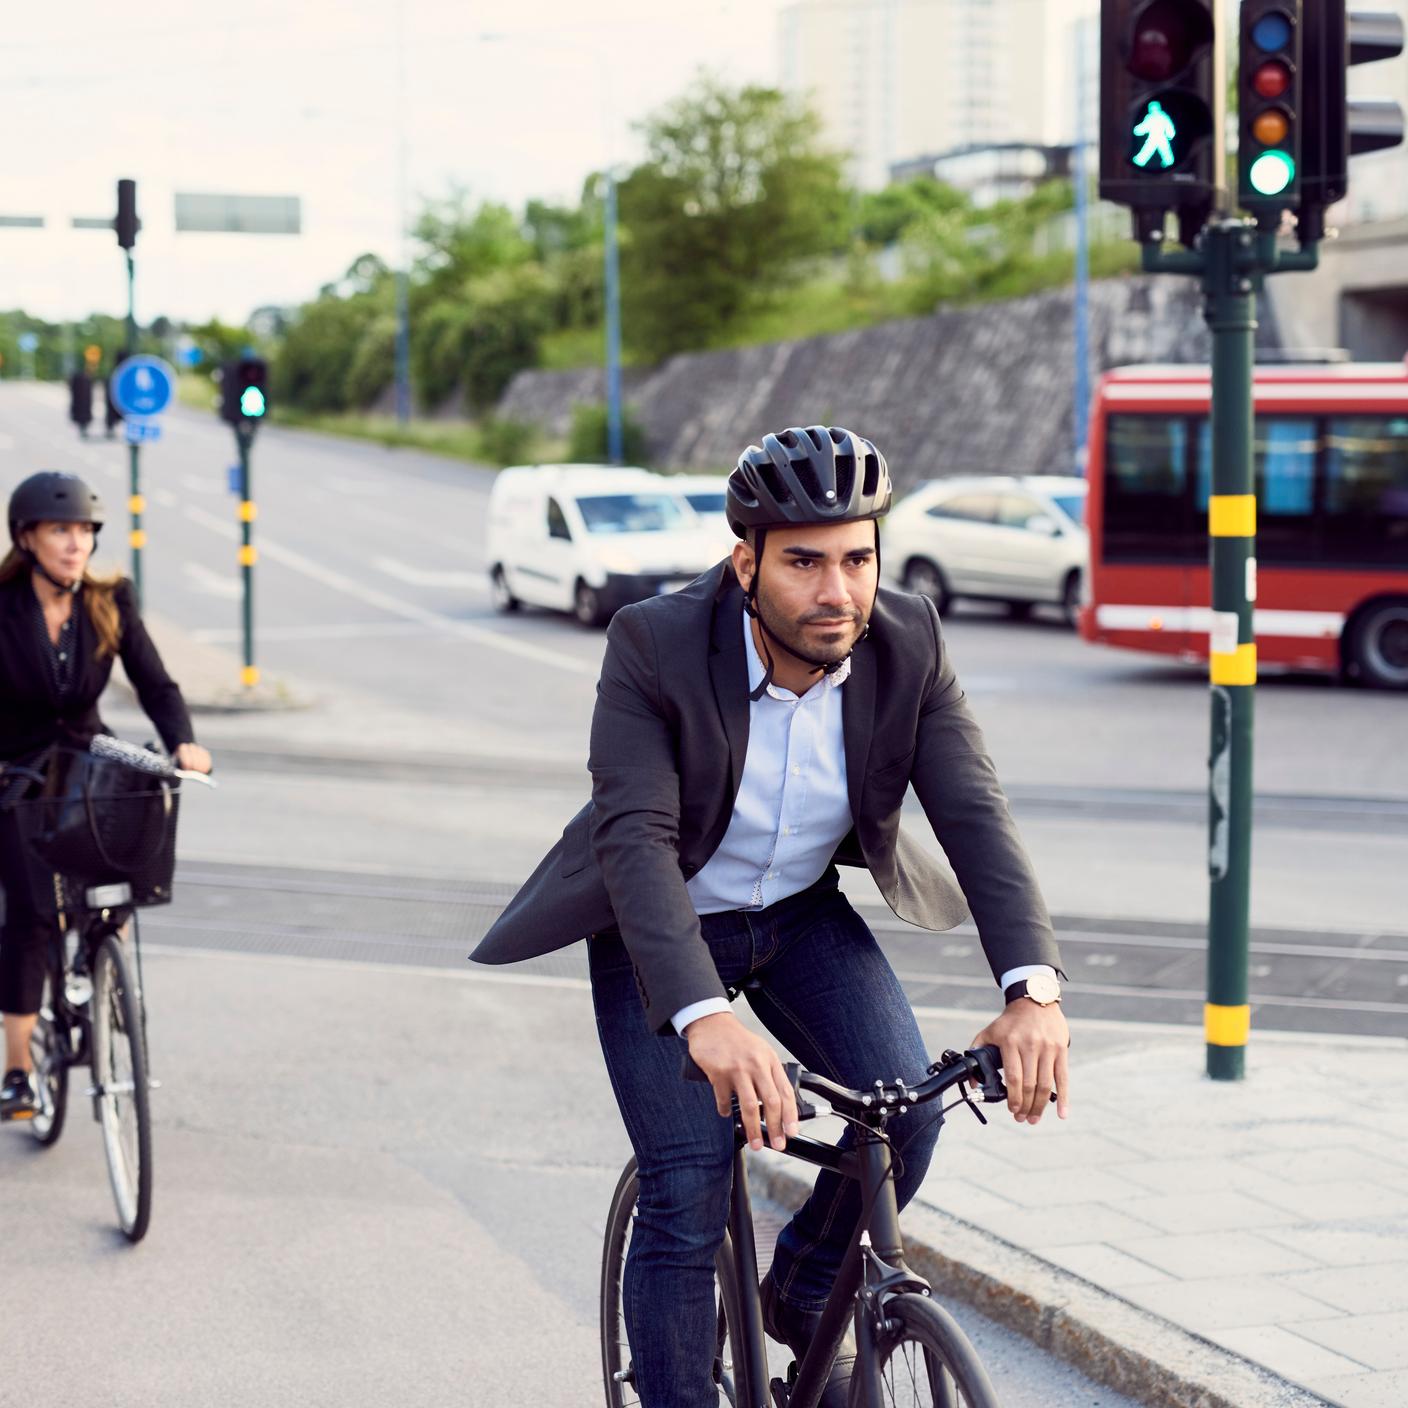 Businesspeople cycling on street in city